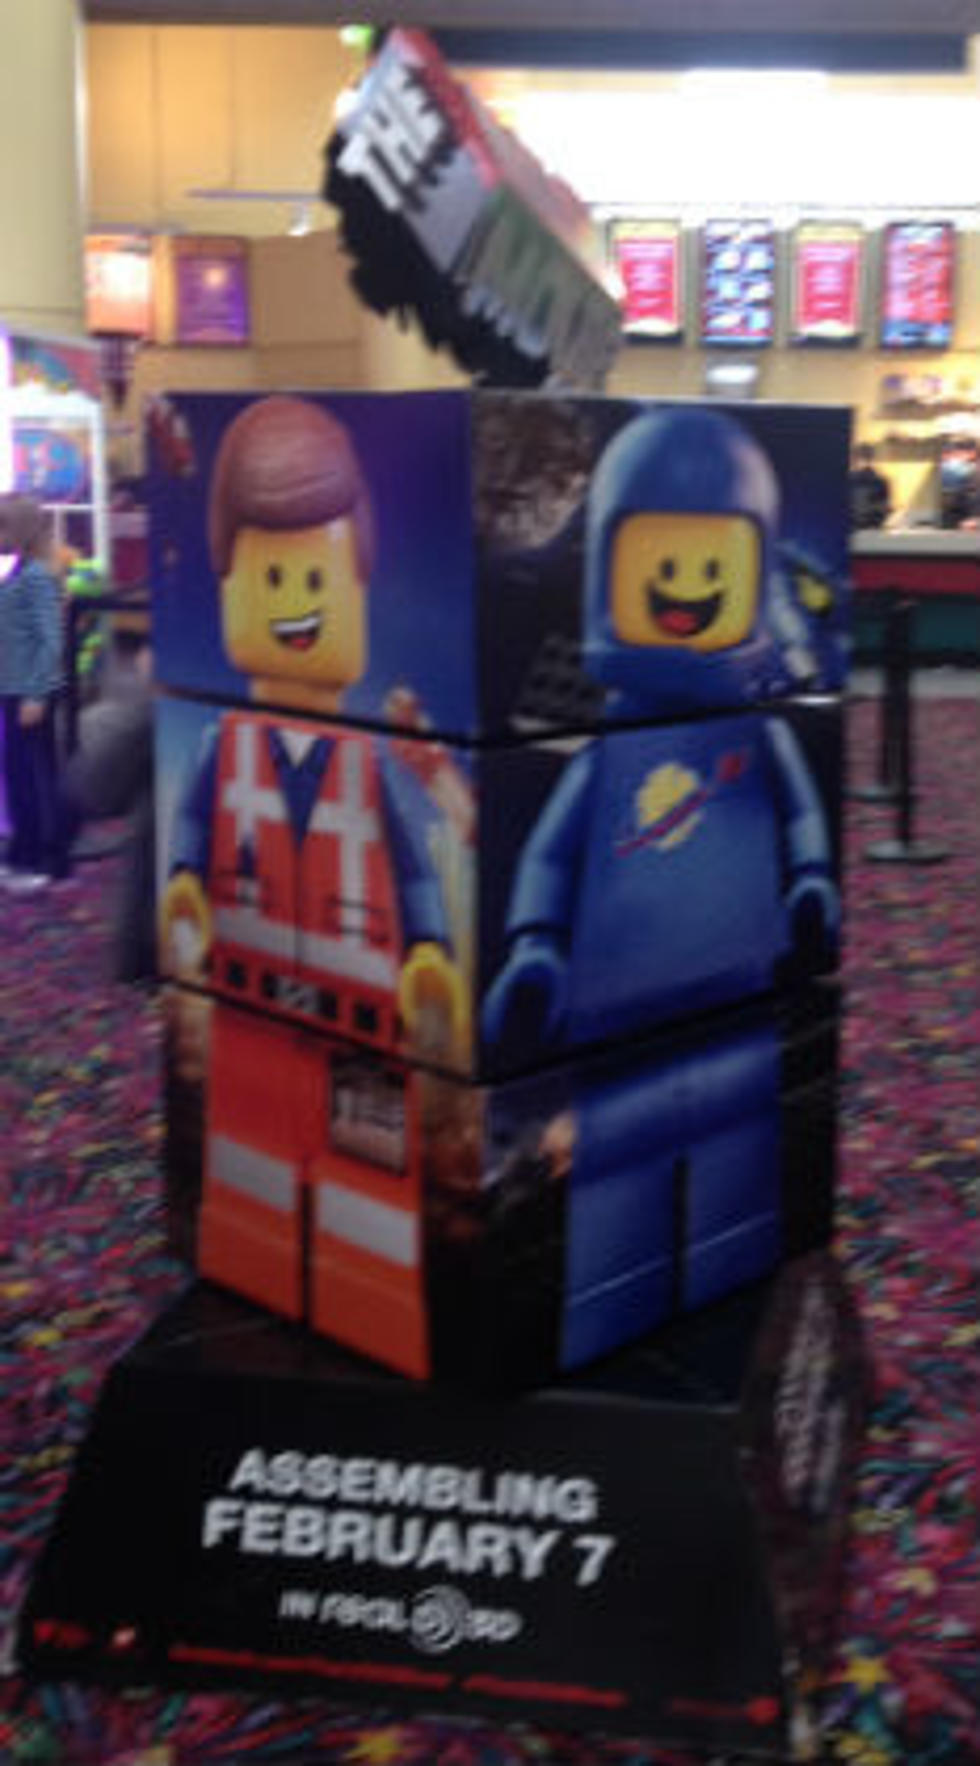 Who Did the Bad Guy in The Lego Movie Resemble?